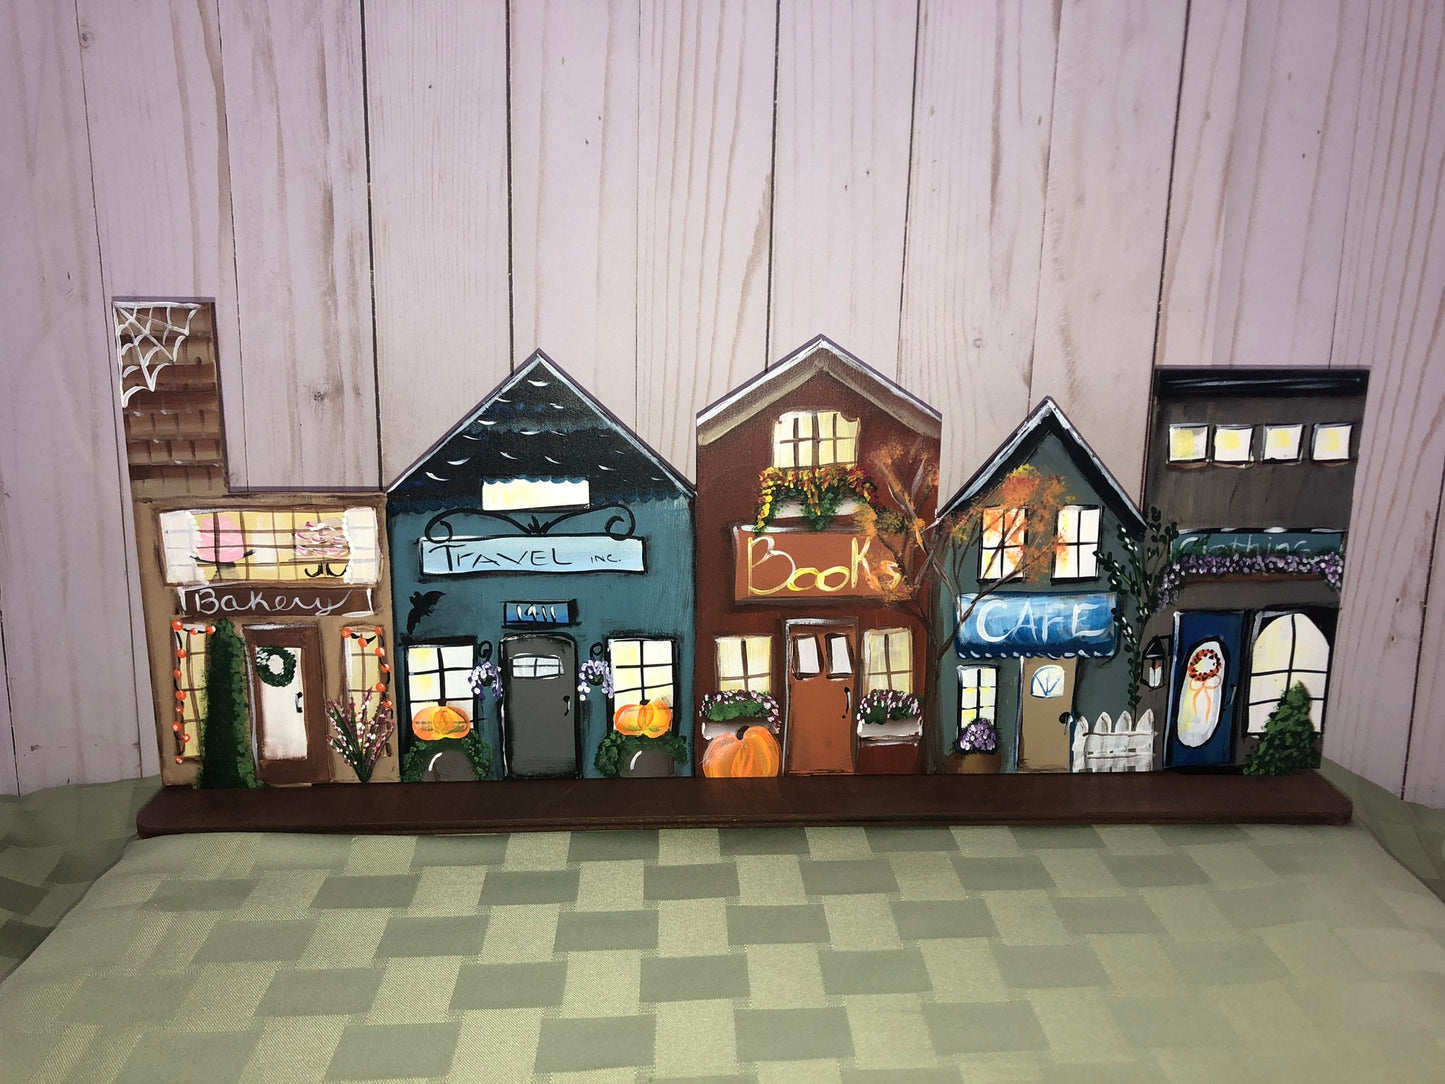 Miniature Village-Hand Painted Town for Fall or Autumn Shelf Sitter